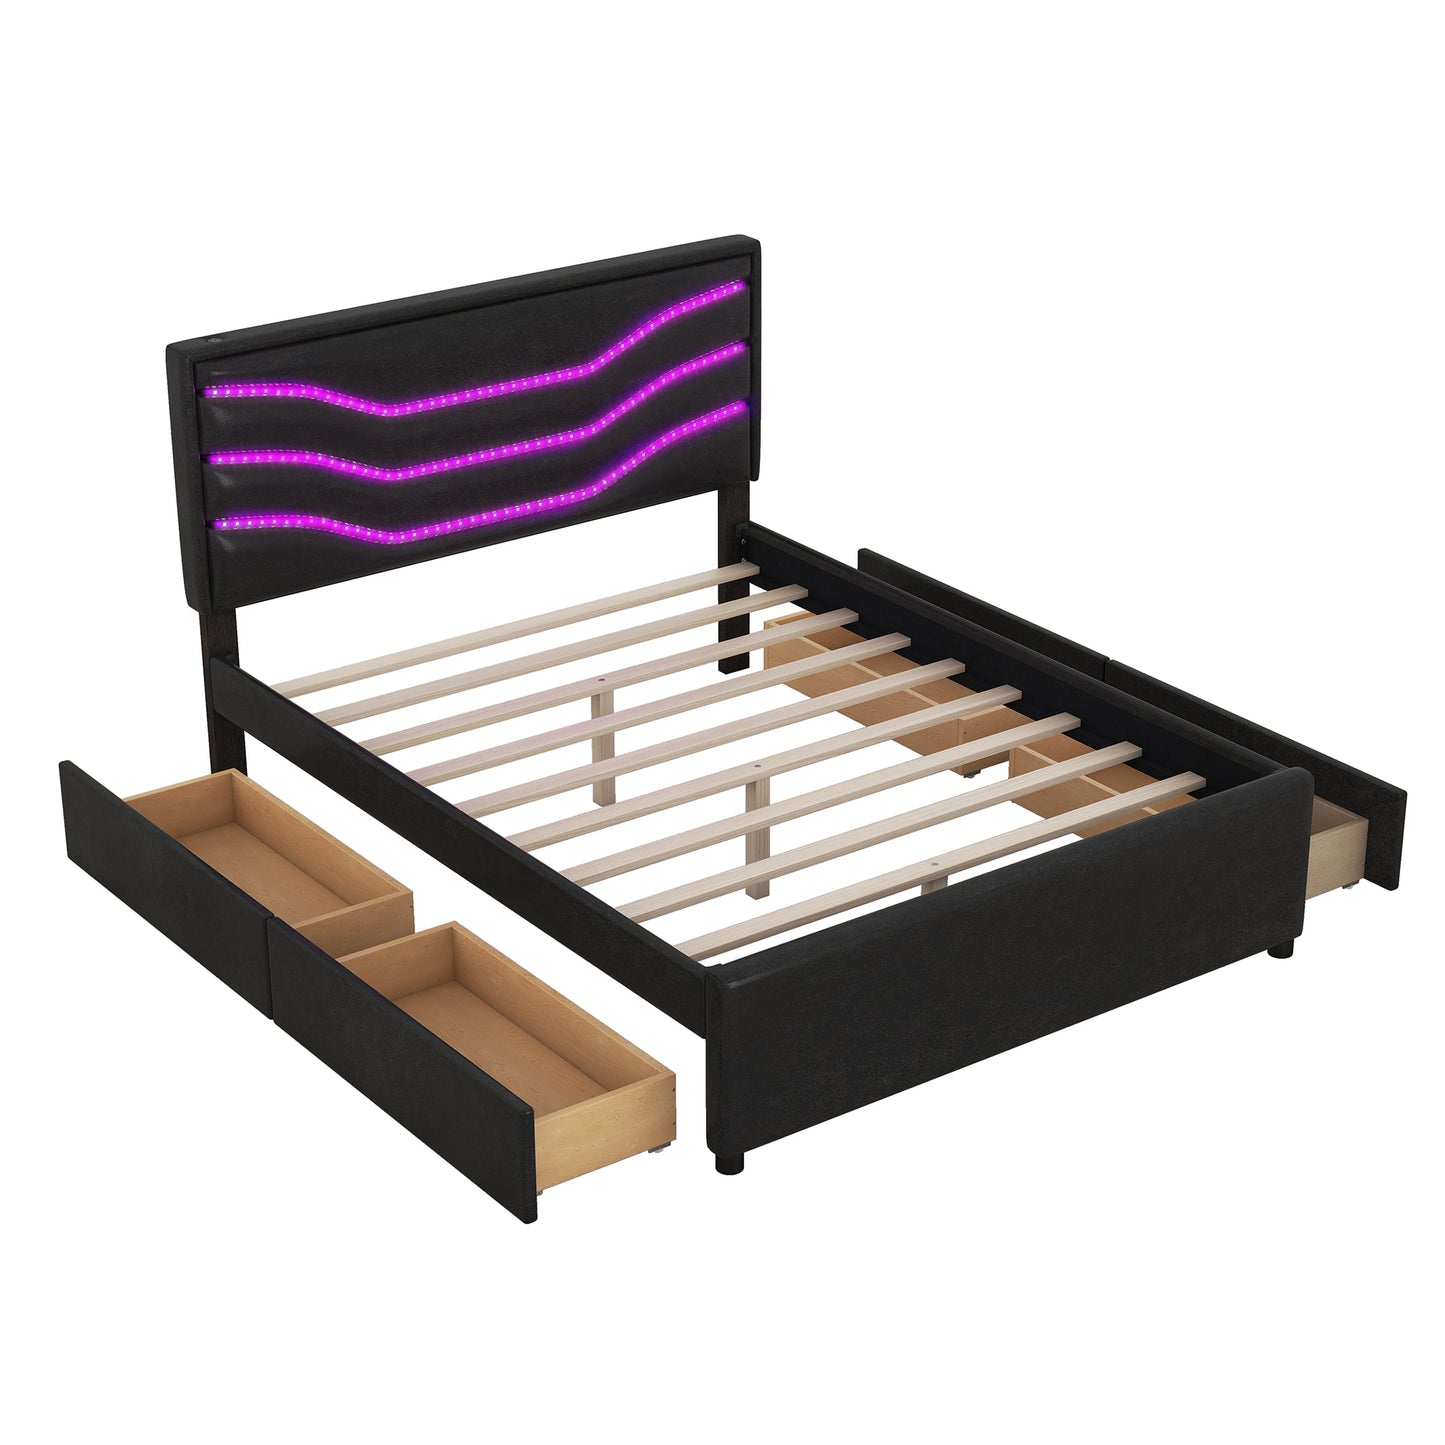 Queen Size Upholstered Storage Platform Bed with LED, 4 Drawers and USB Charging, Black